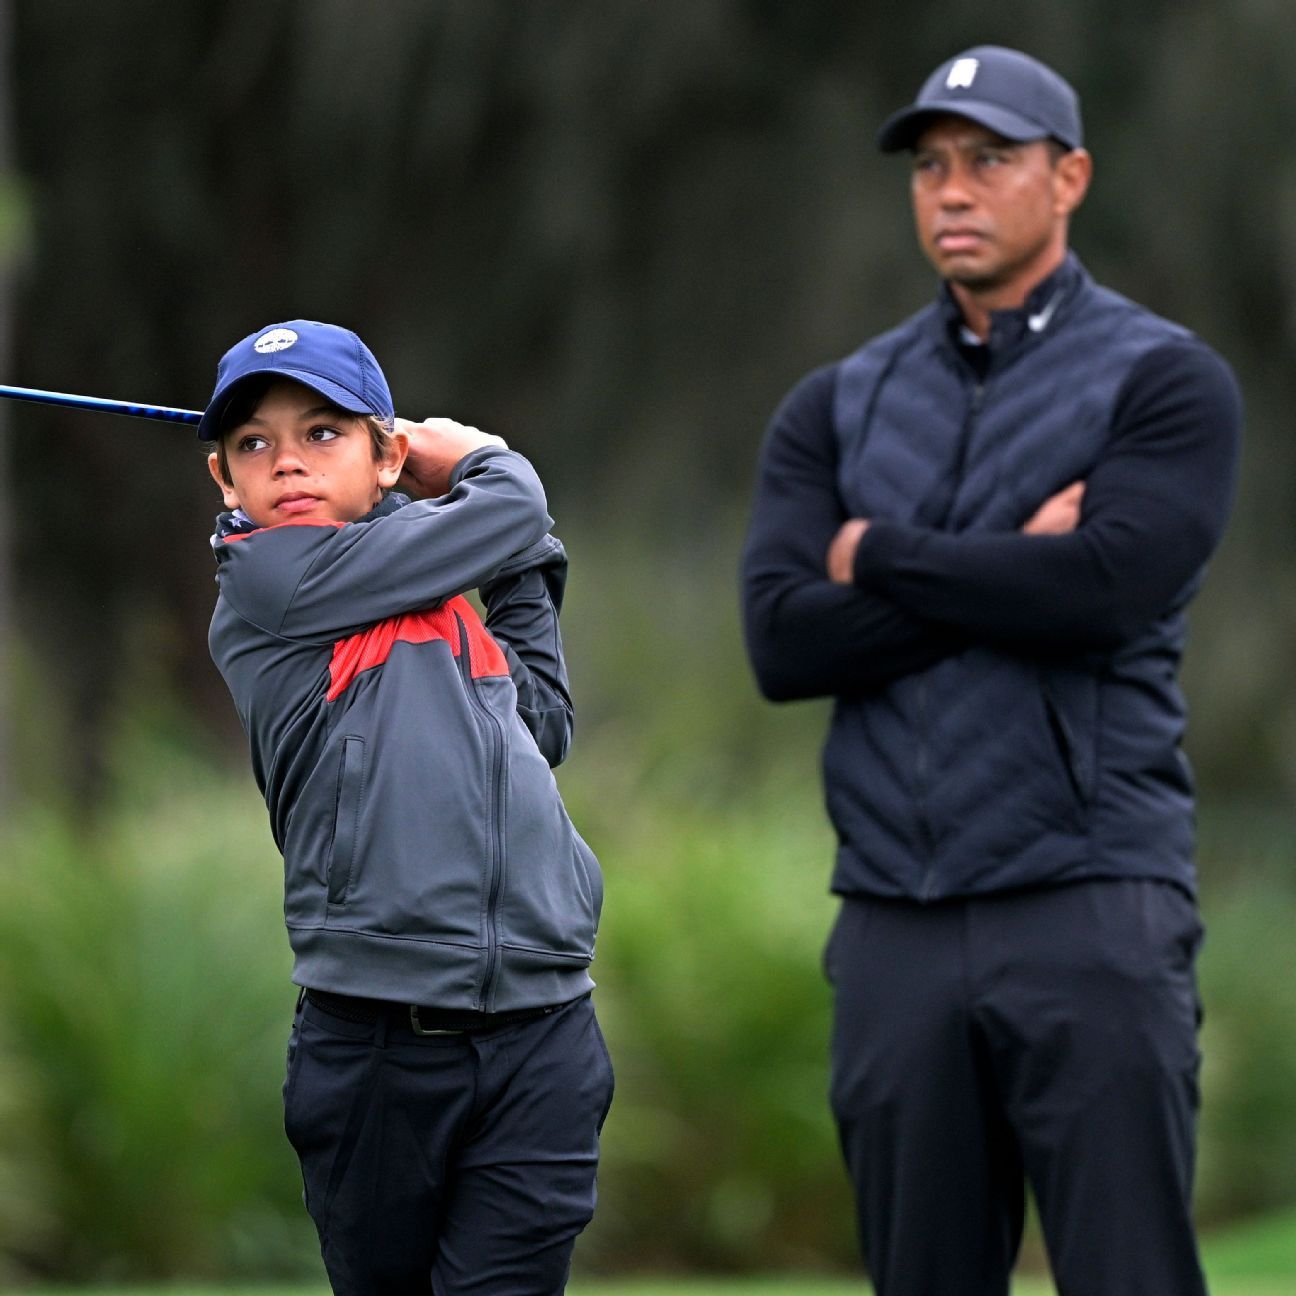 Padraig Harrington – Tiger Woods “is not the star” this week while playing with his son Charlie